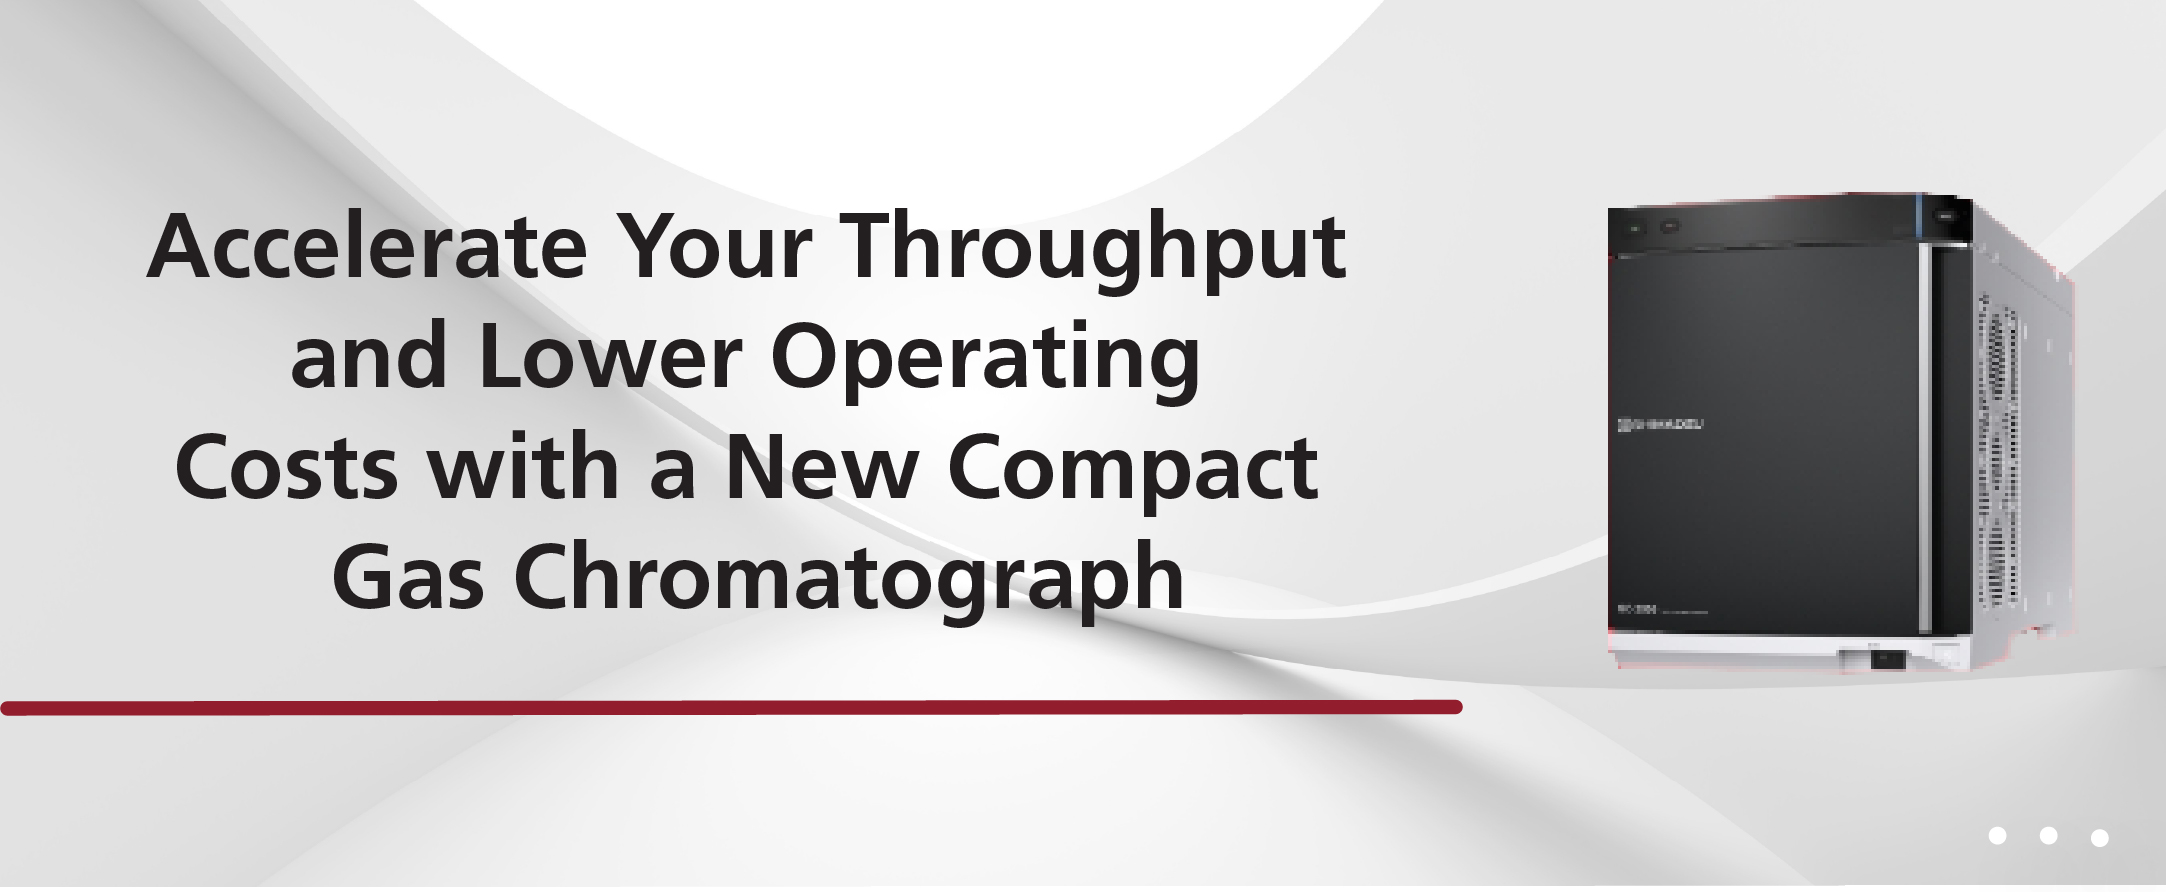 Accelerate Your Throughput and Lower Operating Costs with a New Compact Gas Chromatograph